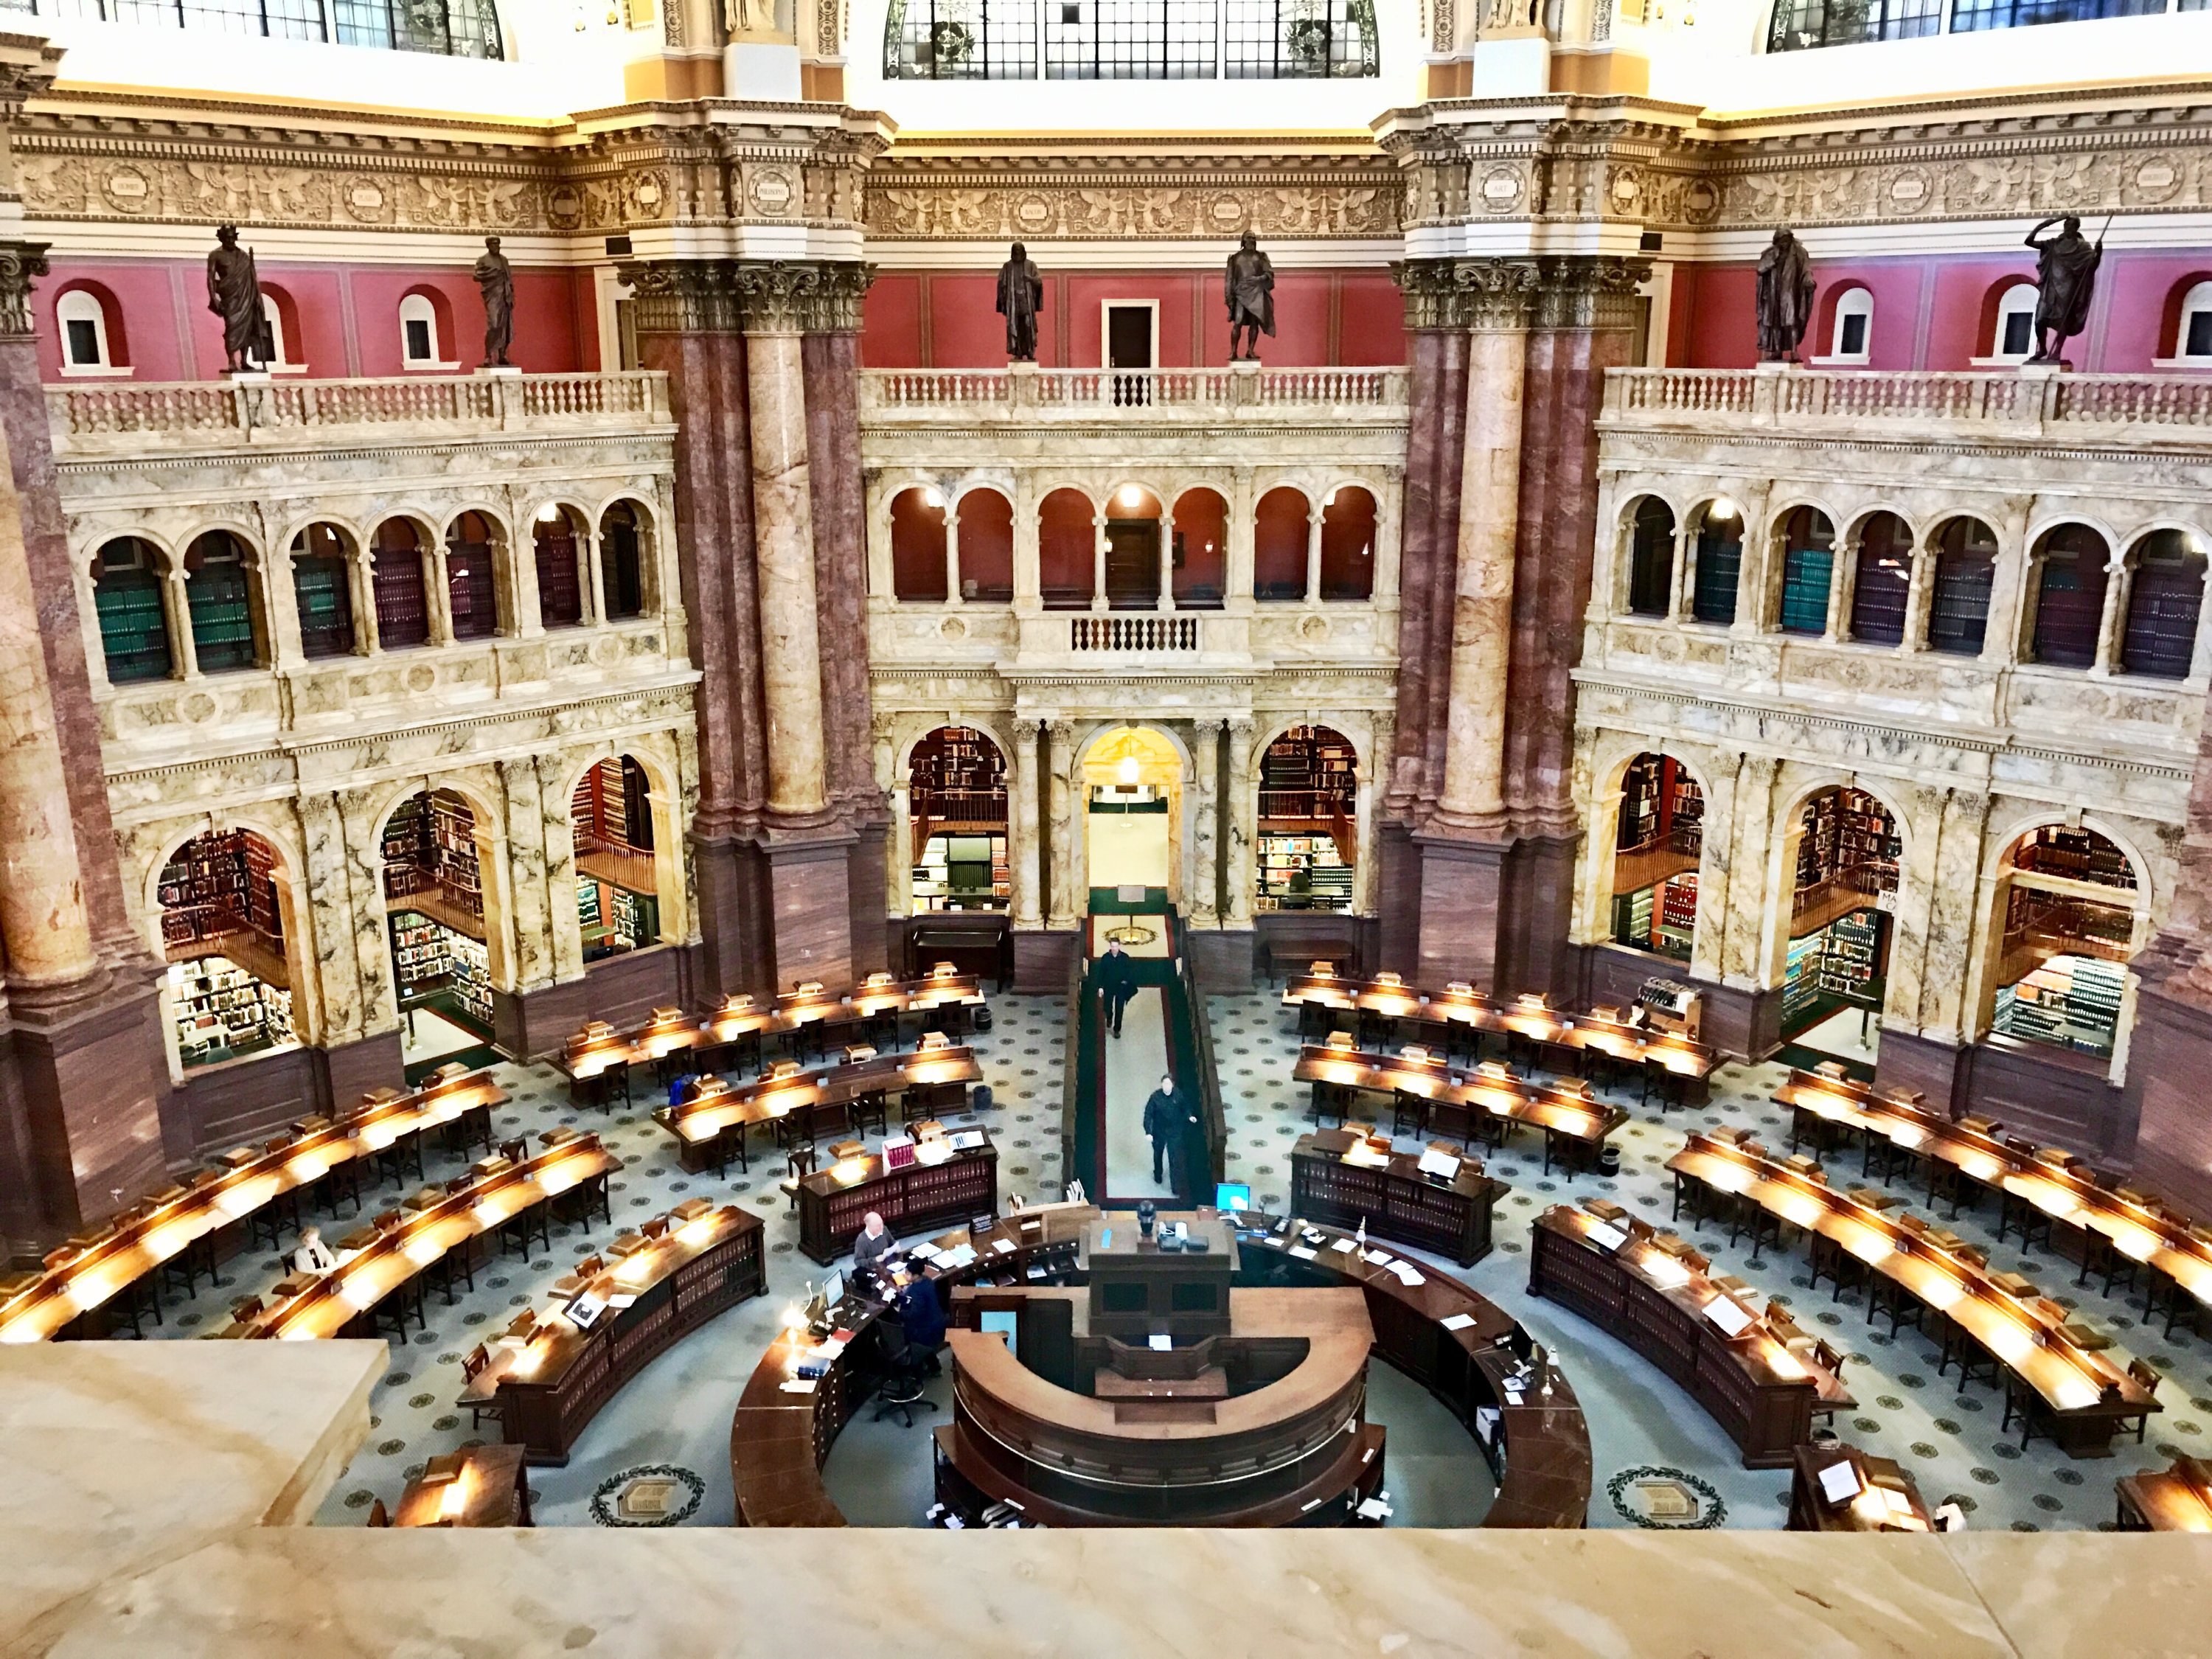 Library of Congress. Photograph by Northfielder/Flickr.